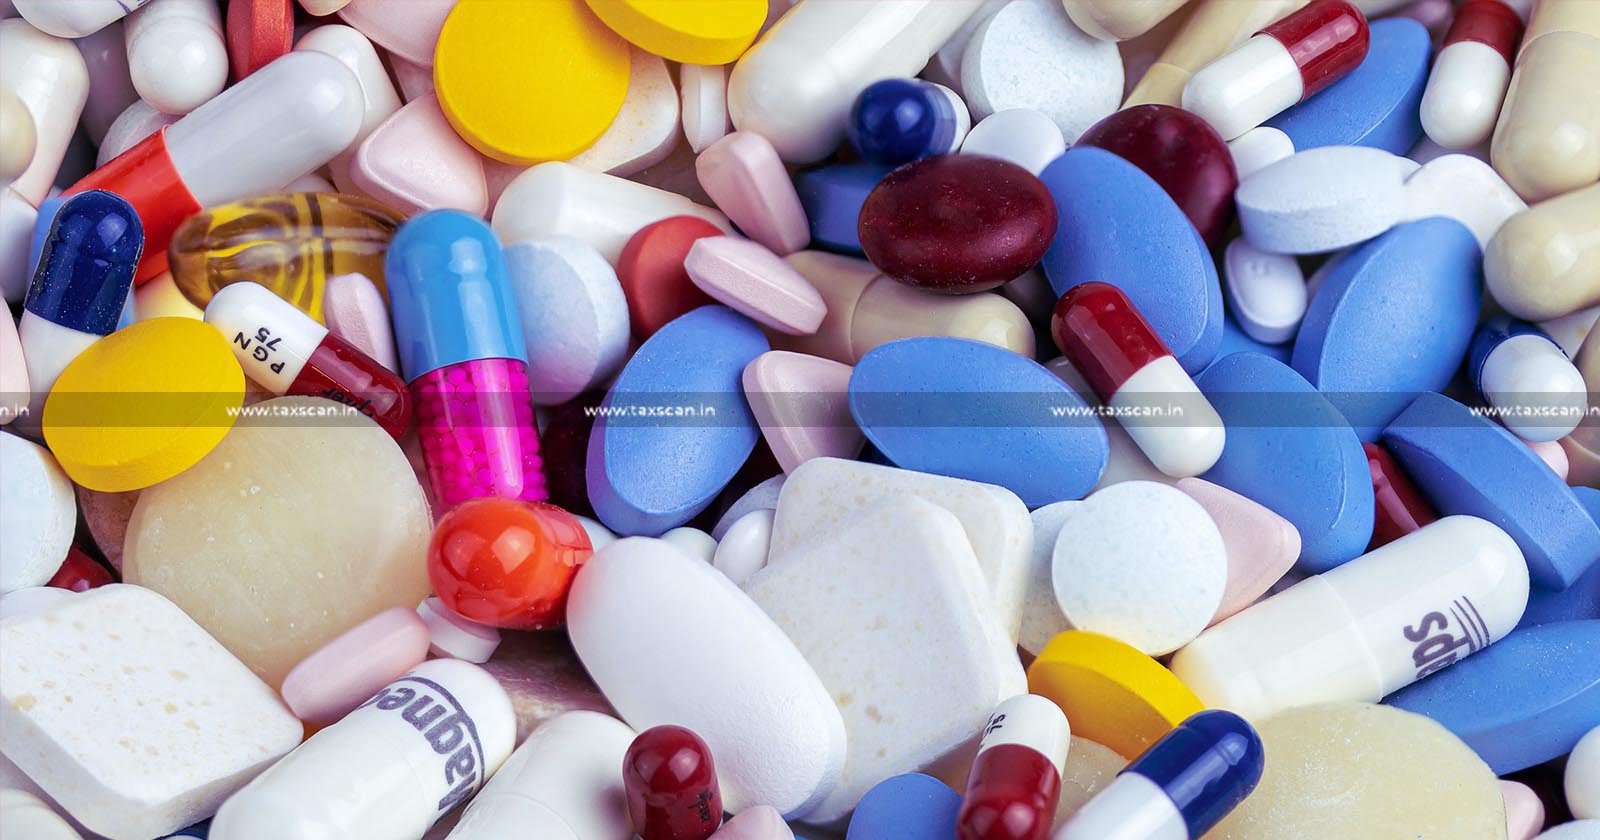 Supply of Medicines and Other Procedures - Supply of Medicines - Treatment of Inpatients Admitted to the Hospital - Hospital - Composite Supply - AAR - Taxscan